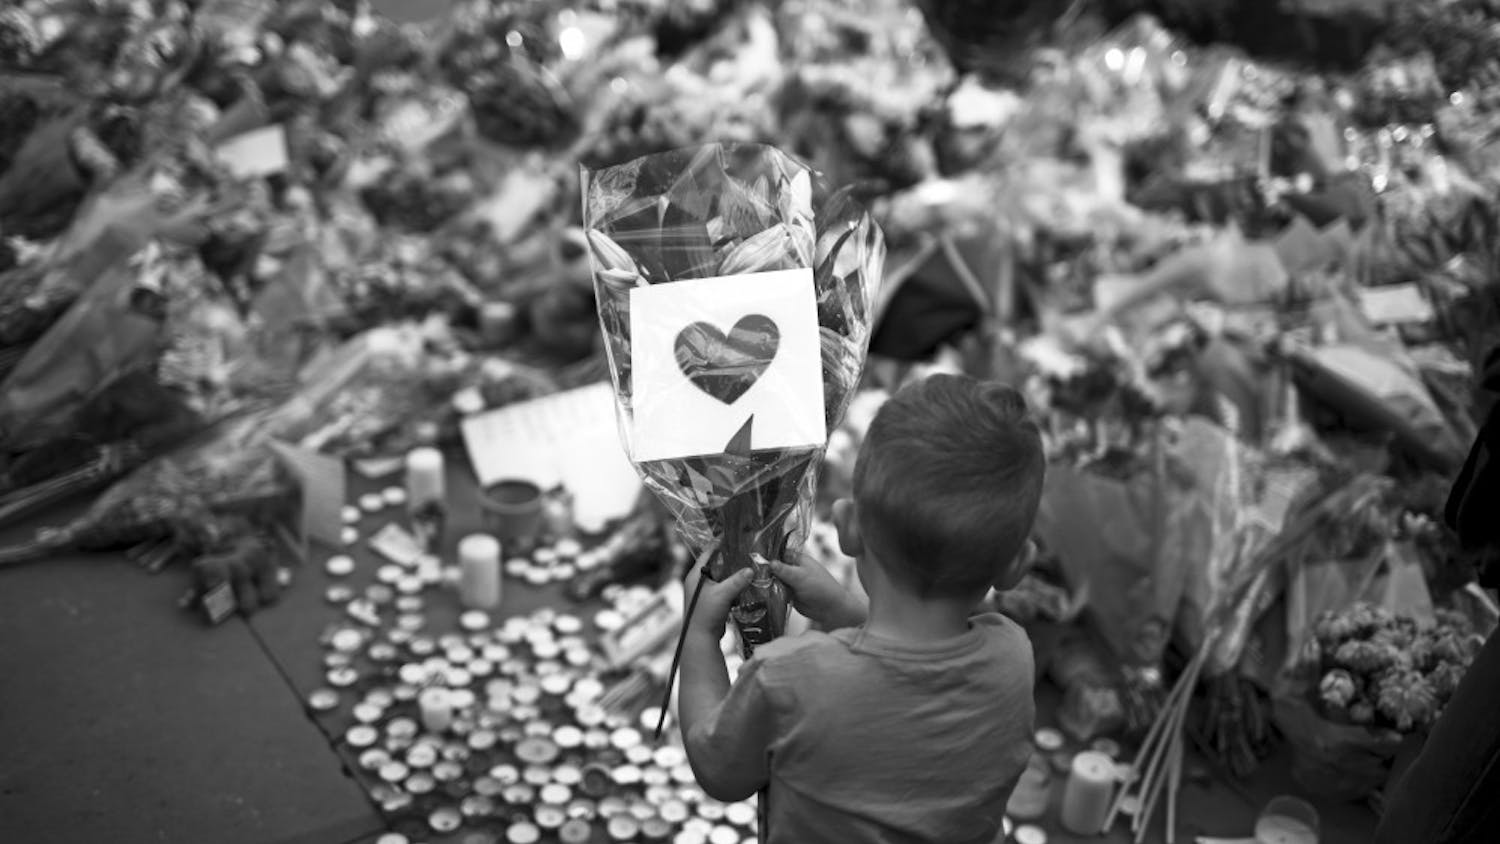 A child places flowers in a square in central Manchester, England, on Wednesday after the suicide bomb attack at an Ariana Grande concert that left 22 people dead and many more injured as it ended on Monday night at the Manchester Arena. 